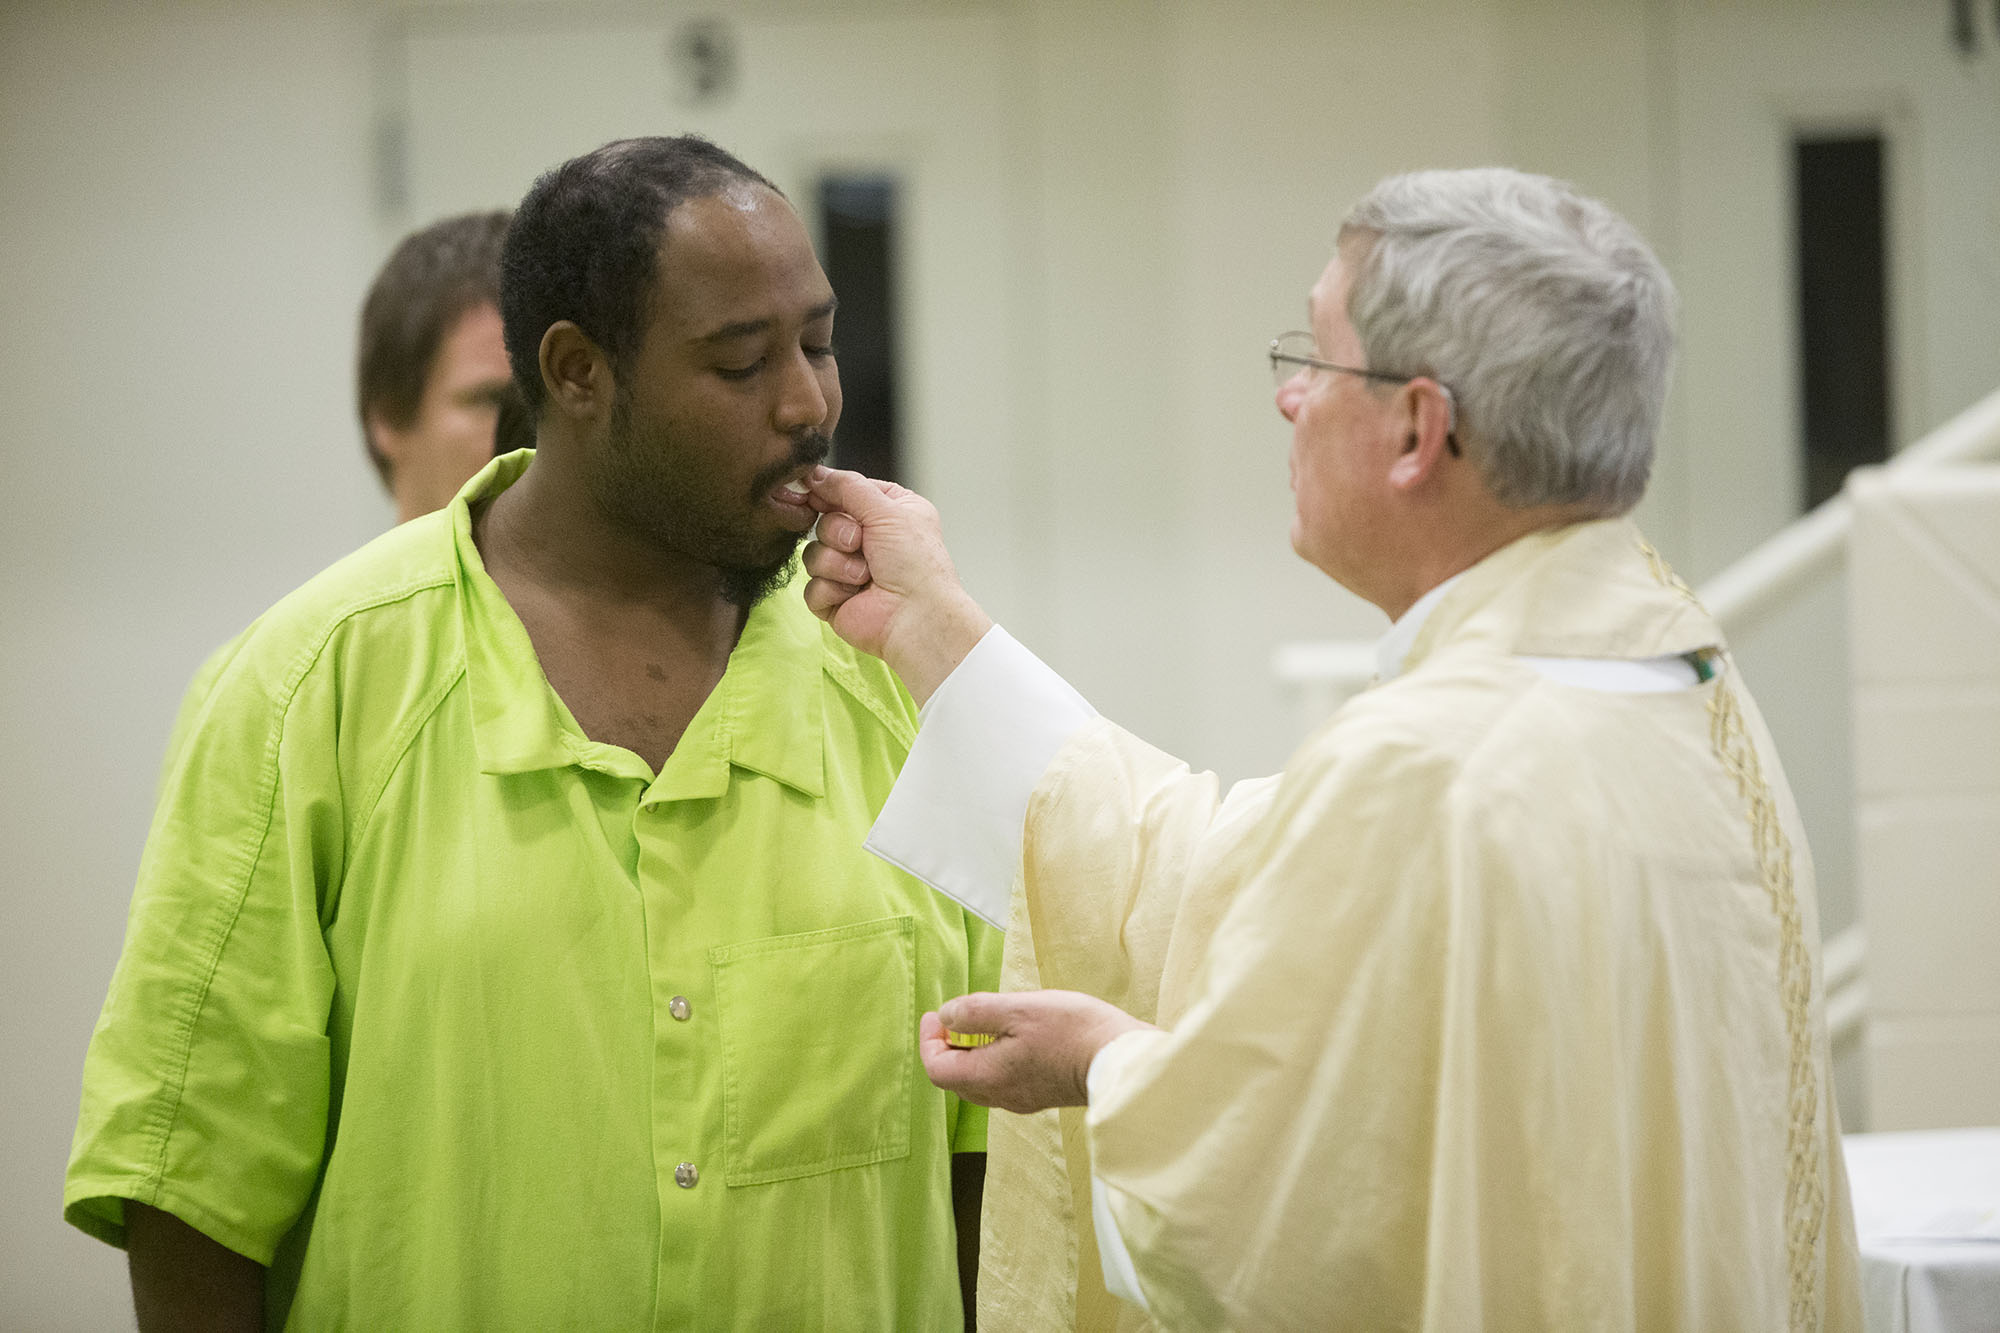 Cornelius Brooks receives communion from Bishop David J. Malloy on Sunday, March 27, 2016, during Easter Mass at the Winnebago County Jail in Rockford. MAX GERSH/STAFF PHOTOGRAPHER/RRSTAR.COM ©2016